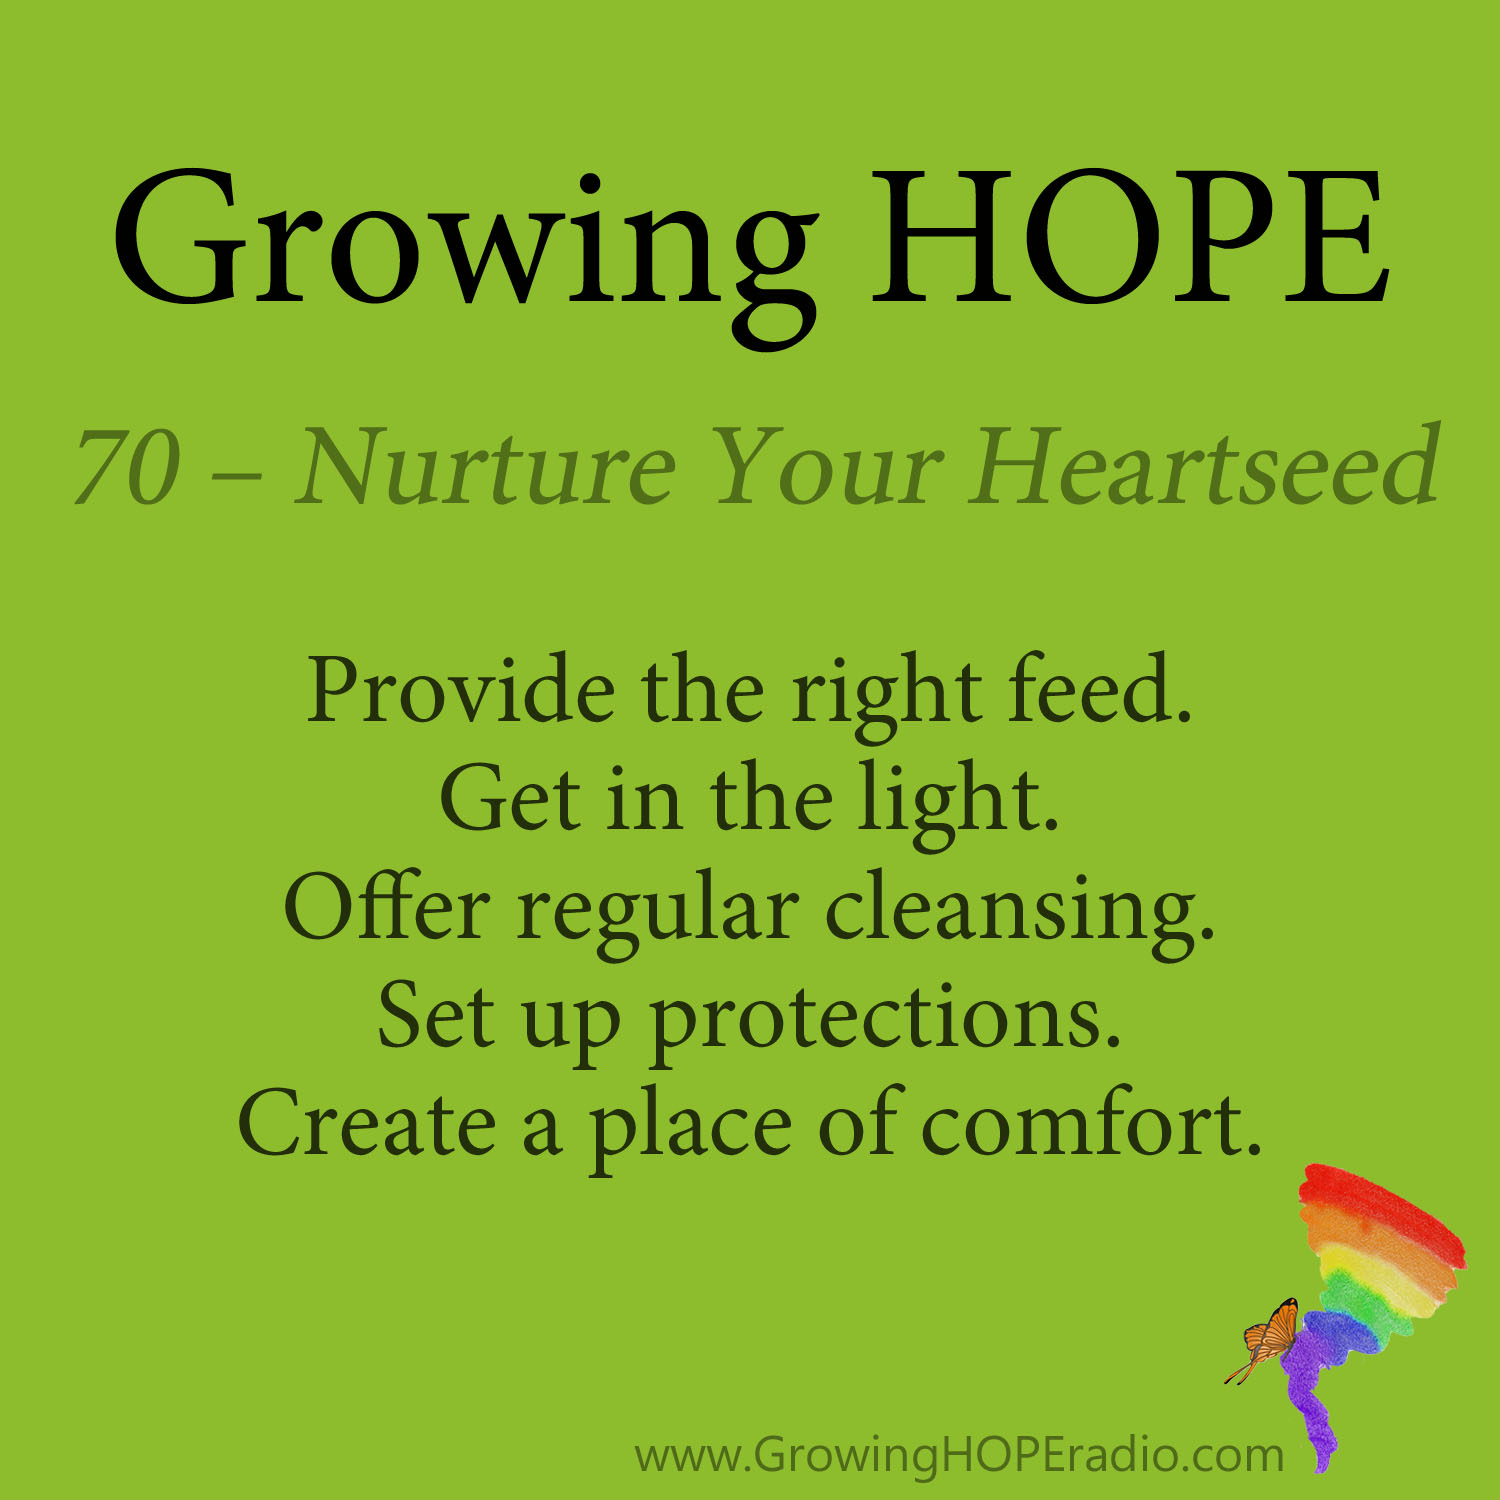 Growing HOPE Daily - 5 Points - 70 Nurture Your Heartseed